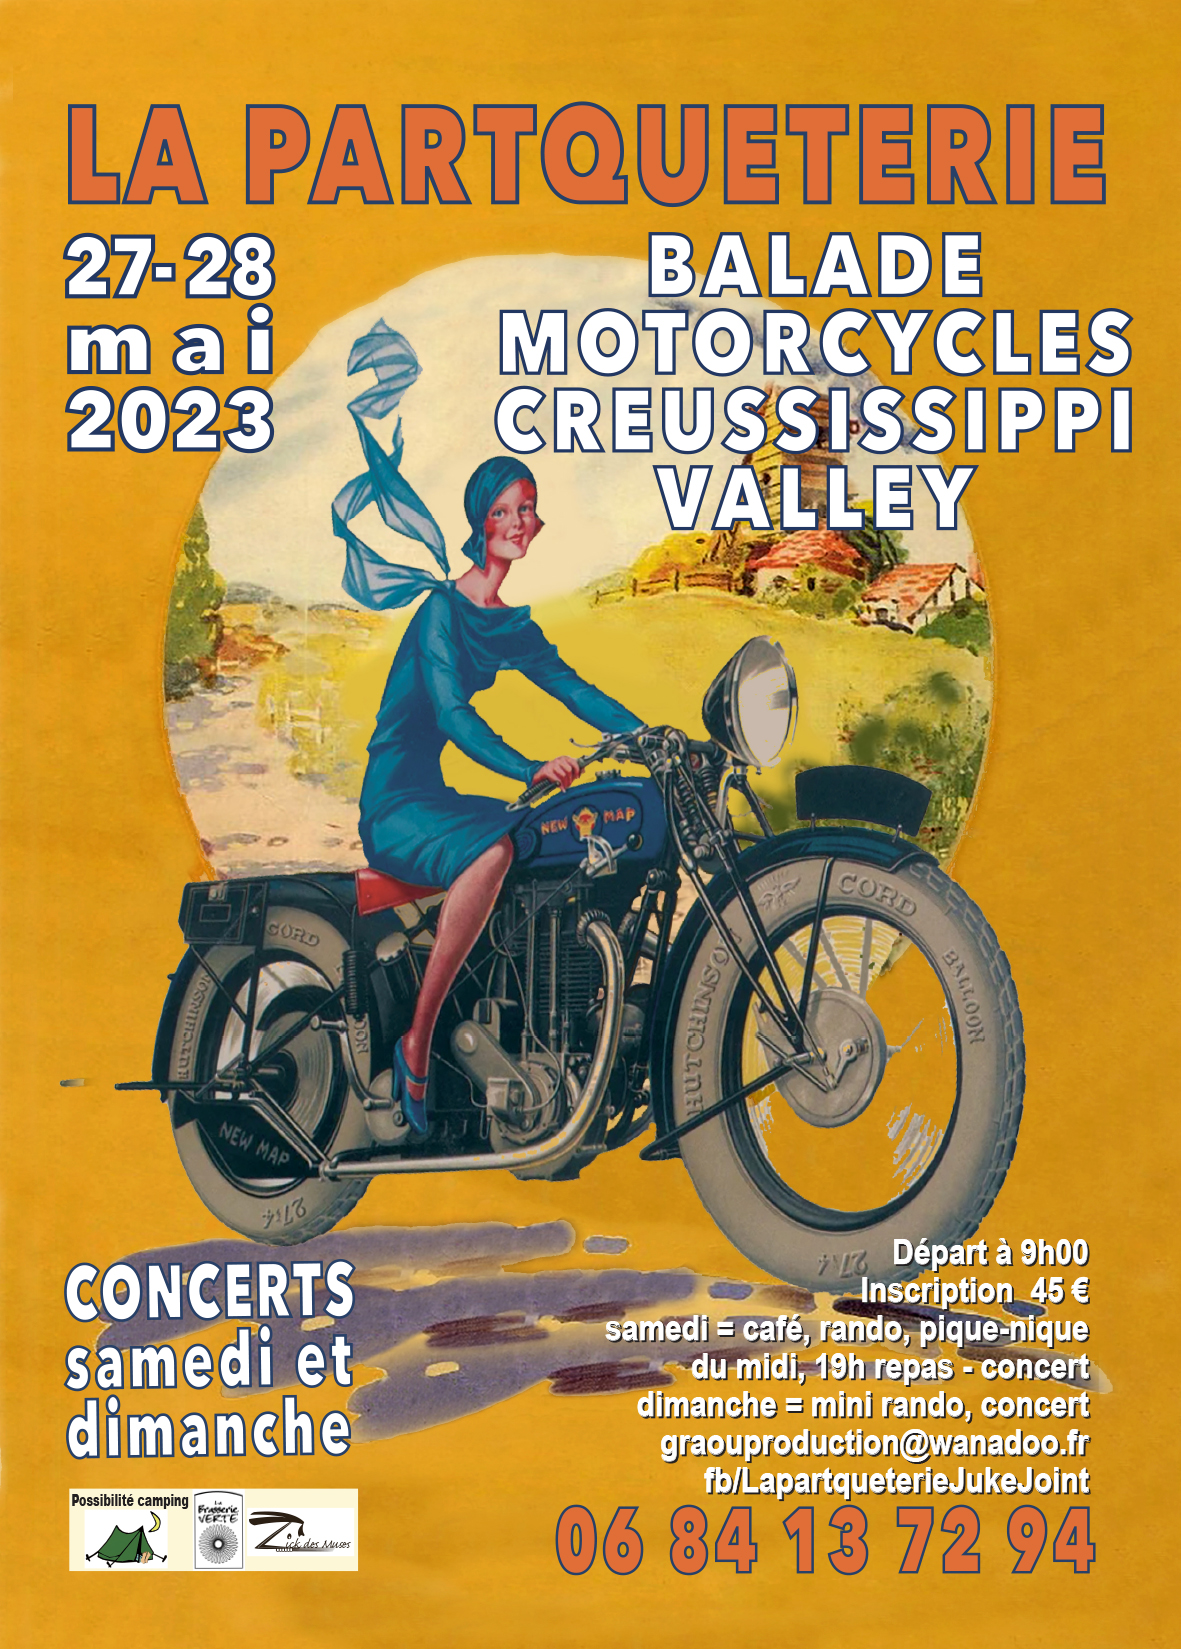 Balade motorcycles Creussissippi Valley